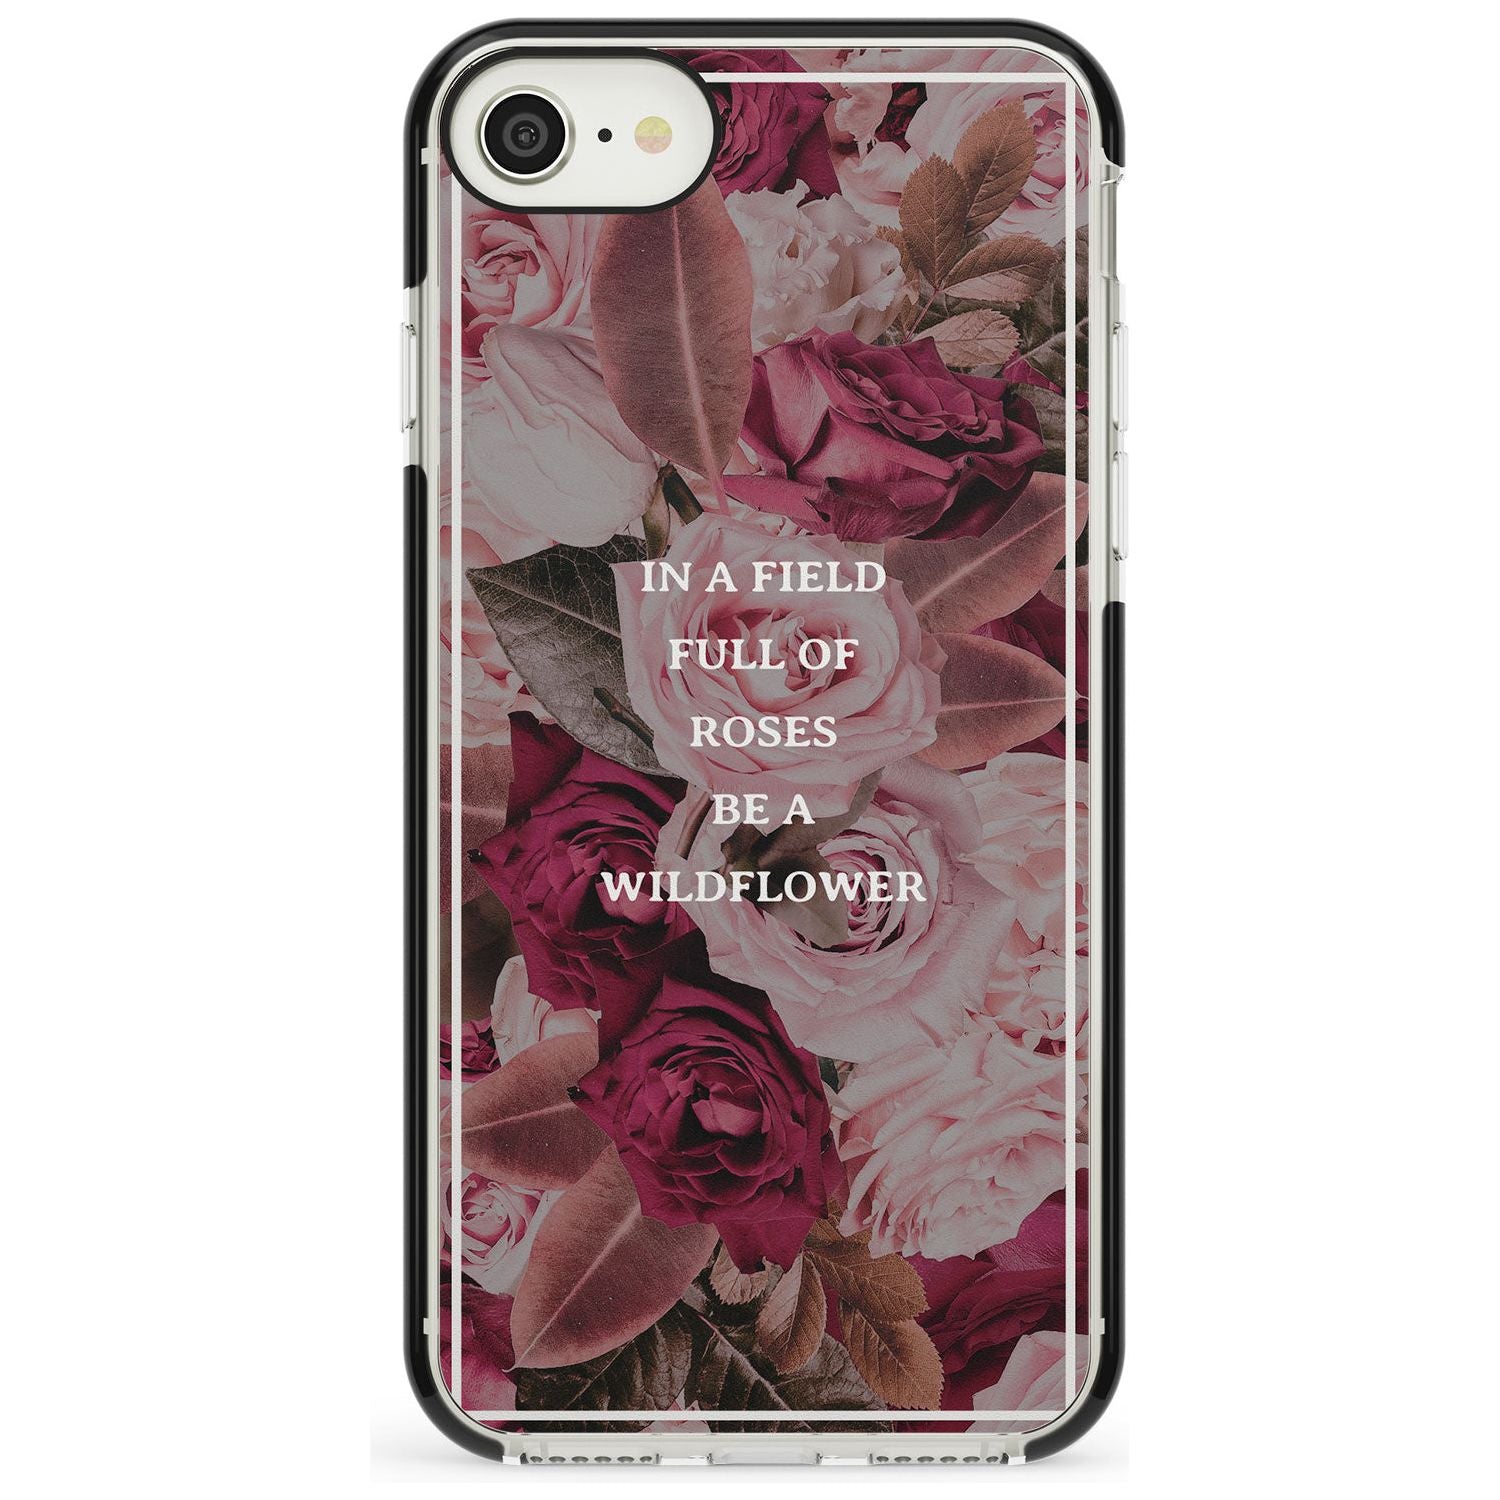 Be a Wildflower Floral Quote Black Impact Phone Case for iPhone SE 8 7 Plus